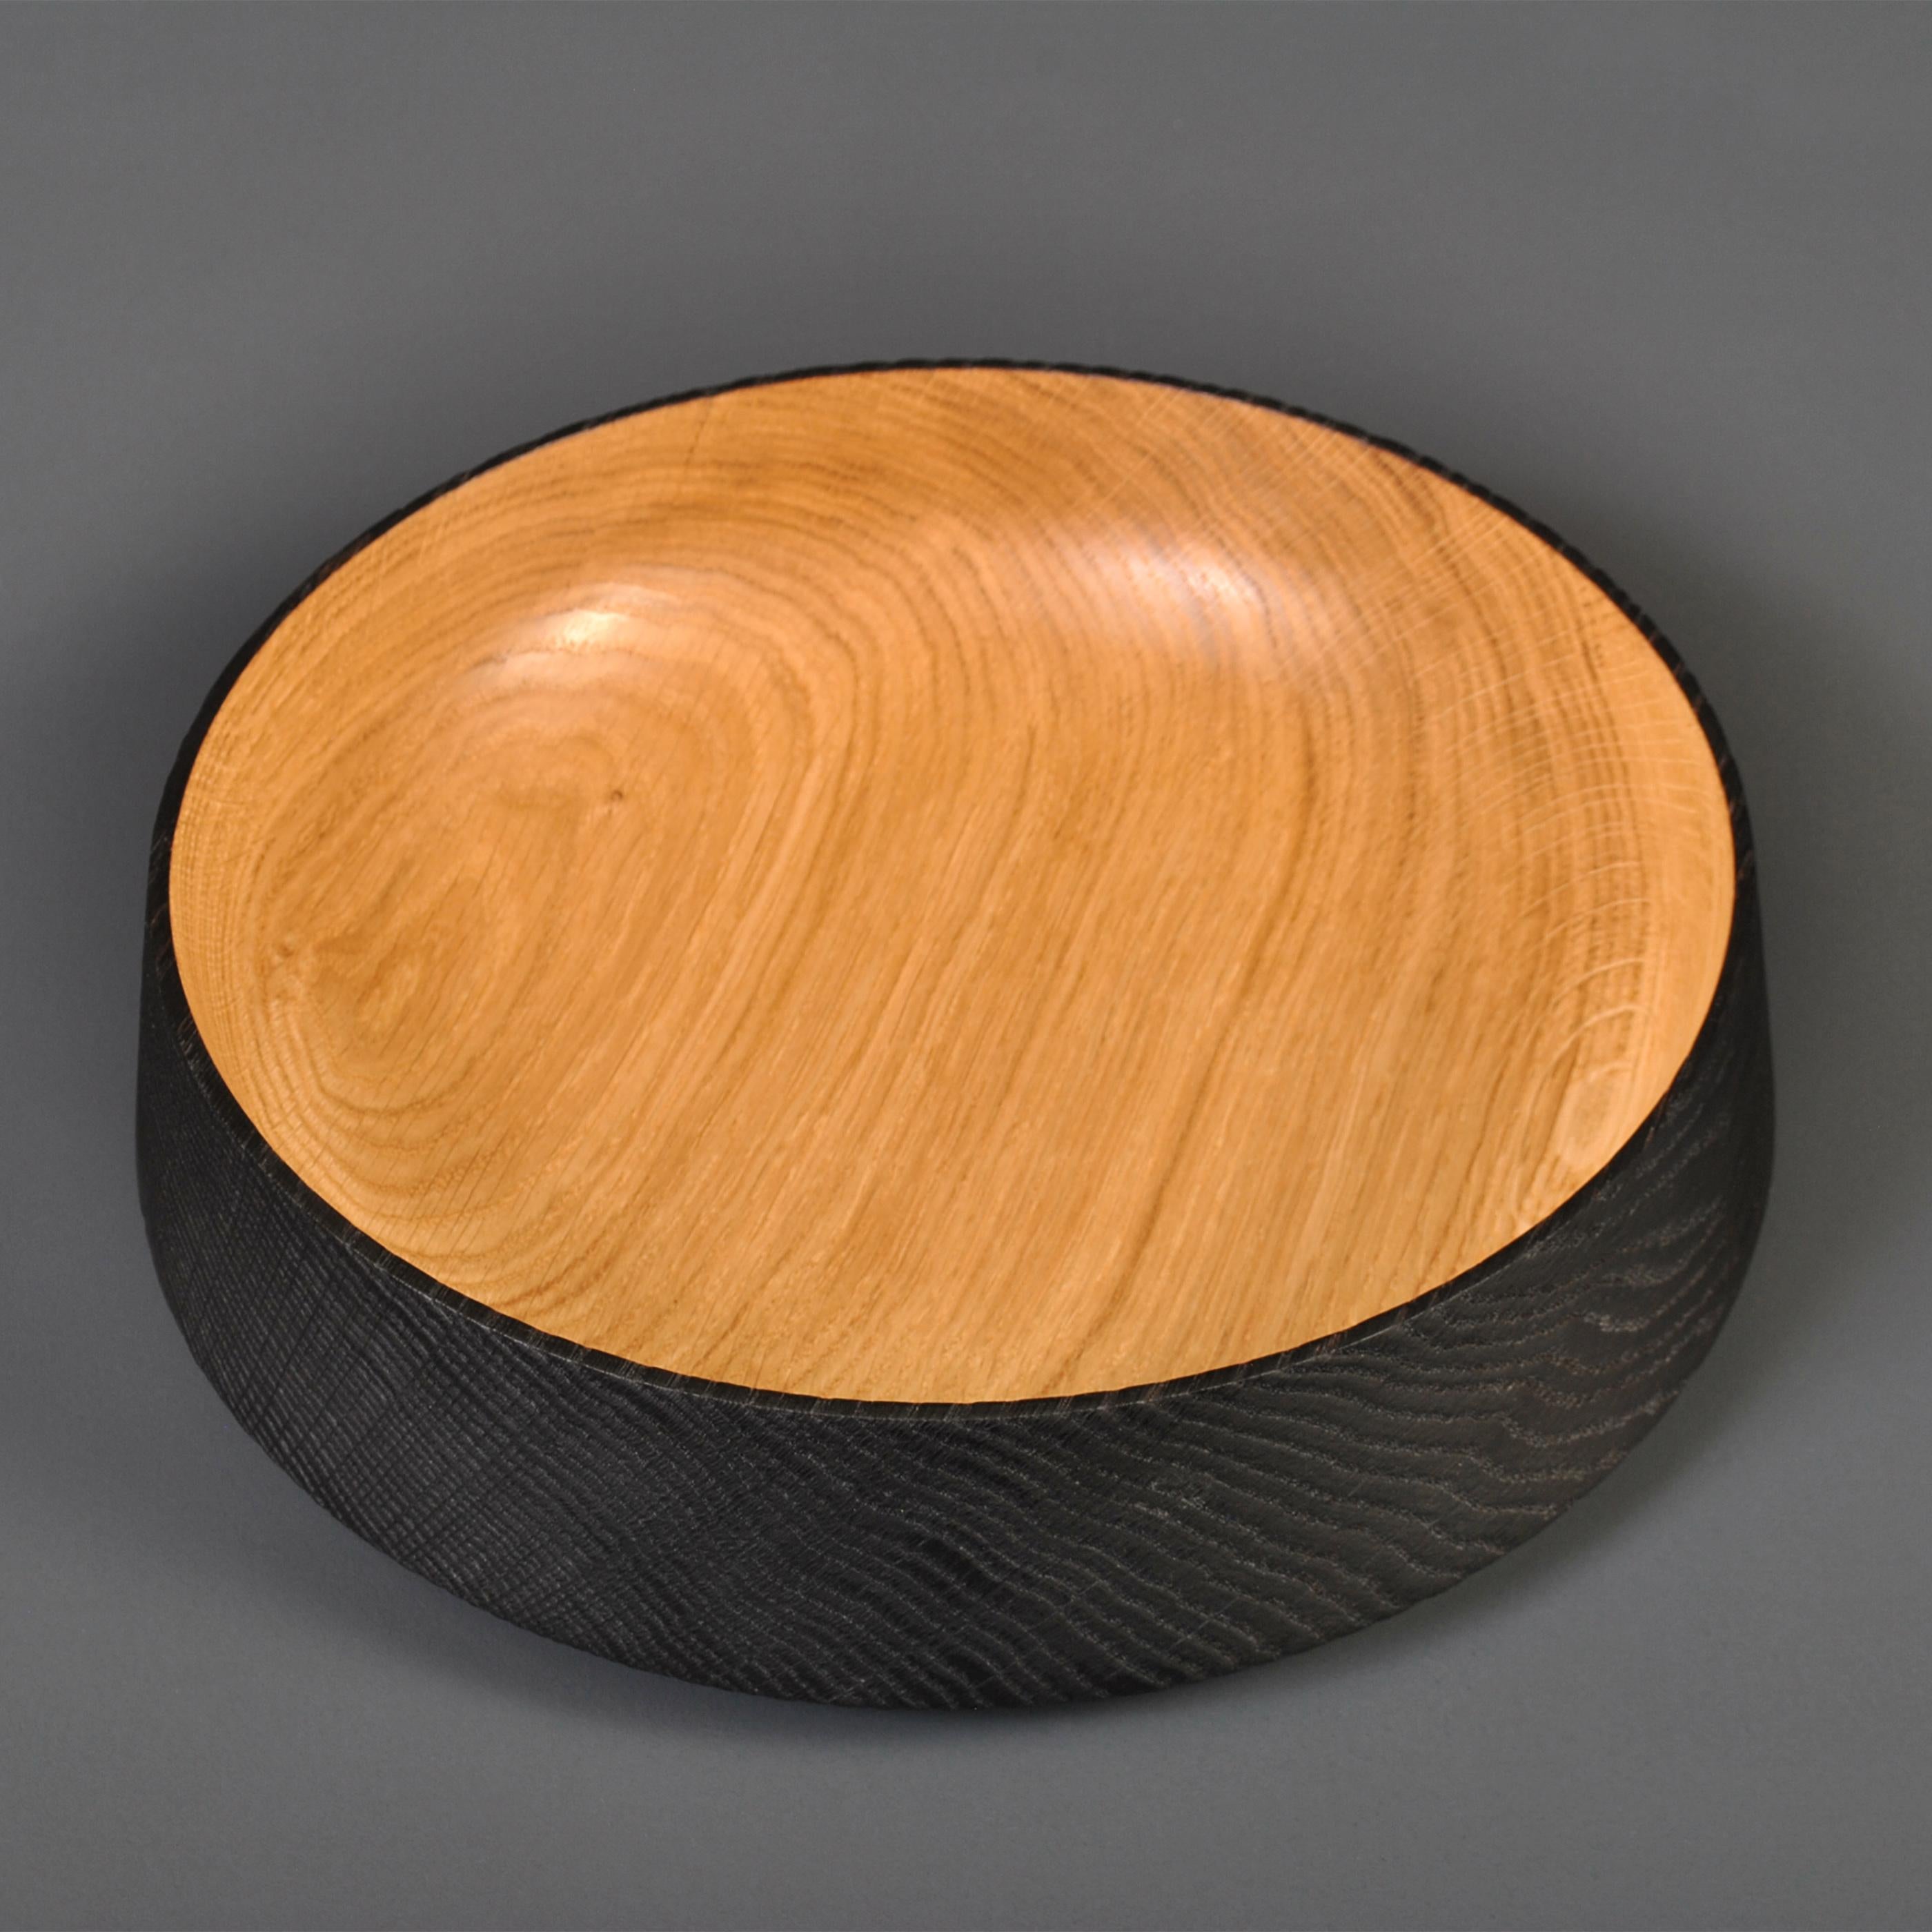 Fine traditionally hand-crafted and turned Oak half Yakisugi platter - bowl. These are handmade to the very best quality in London using traditional techniques.
Finished in food safe oil.
A beautiful piece of handmade contemporary design with a